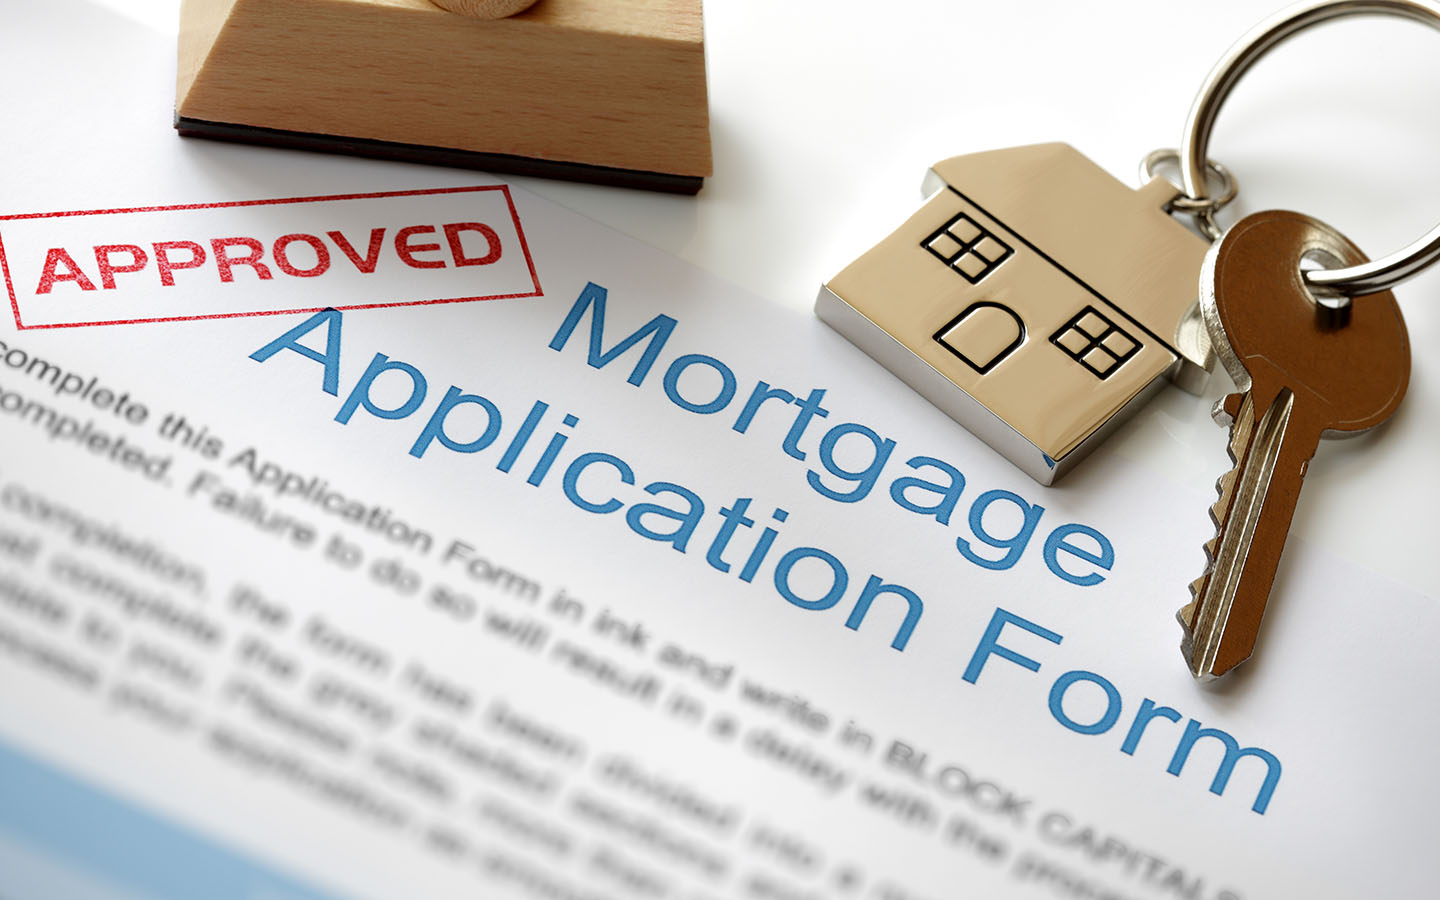 apply for pre-approval as it helps during the home-buying process